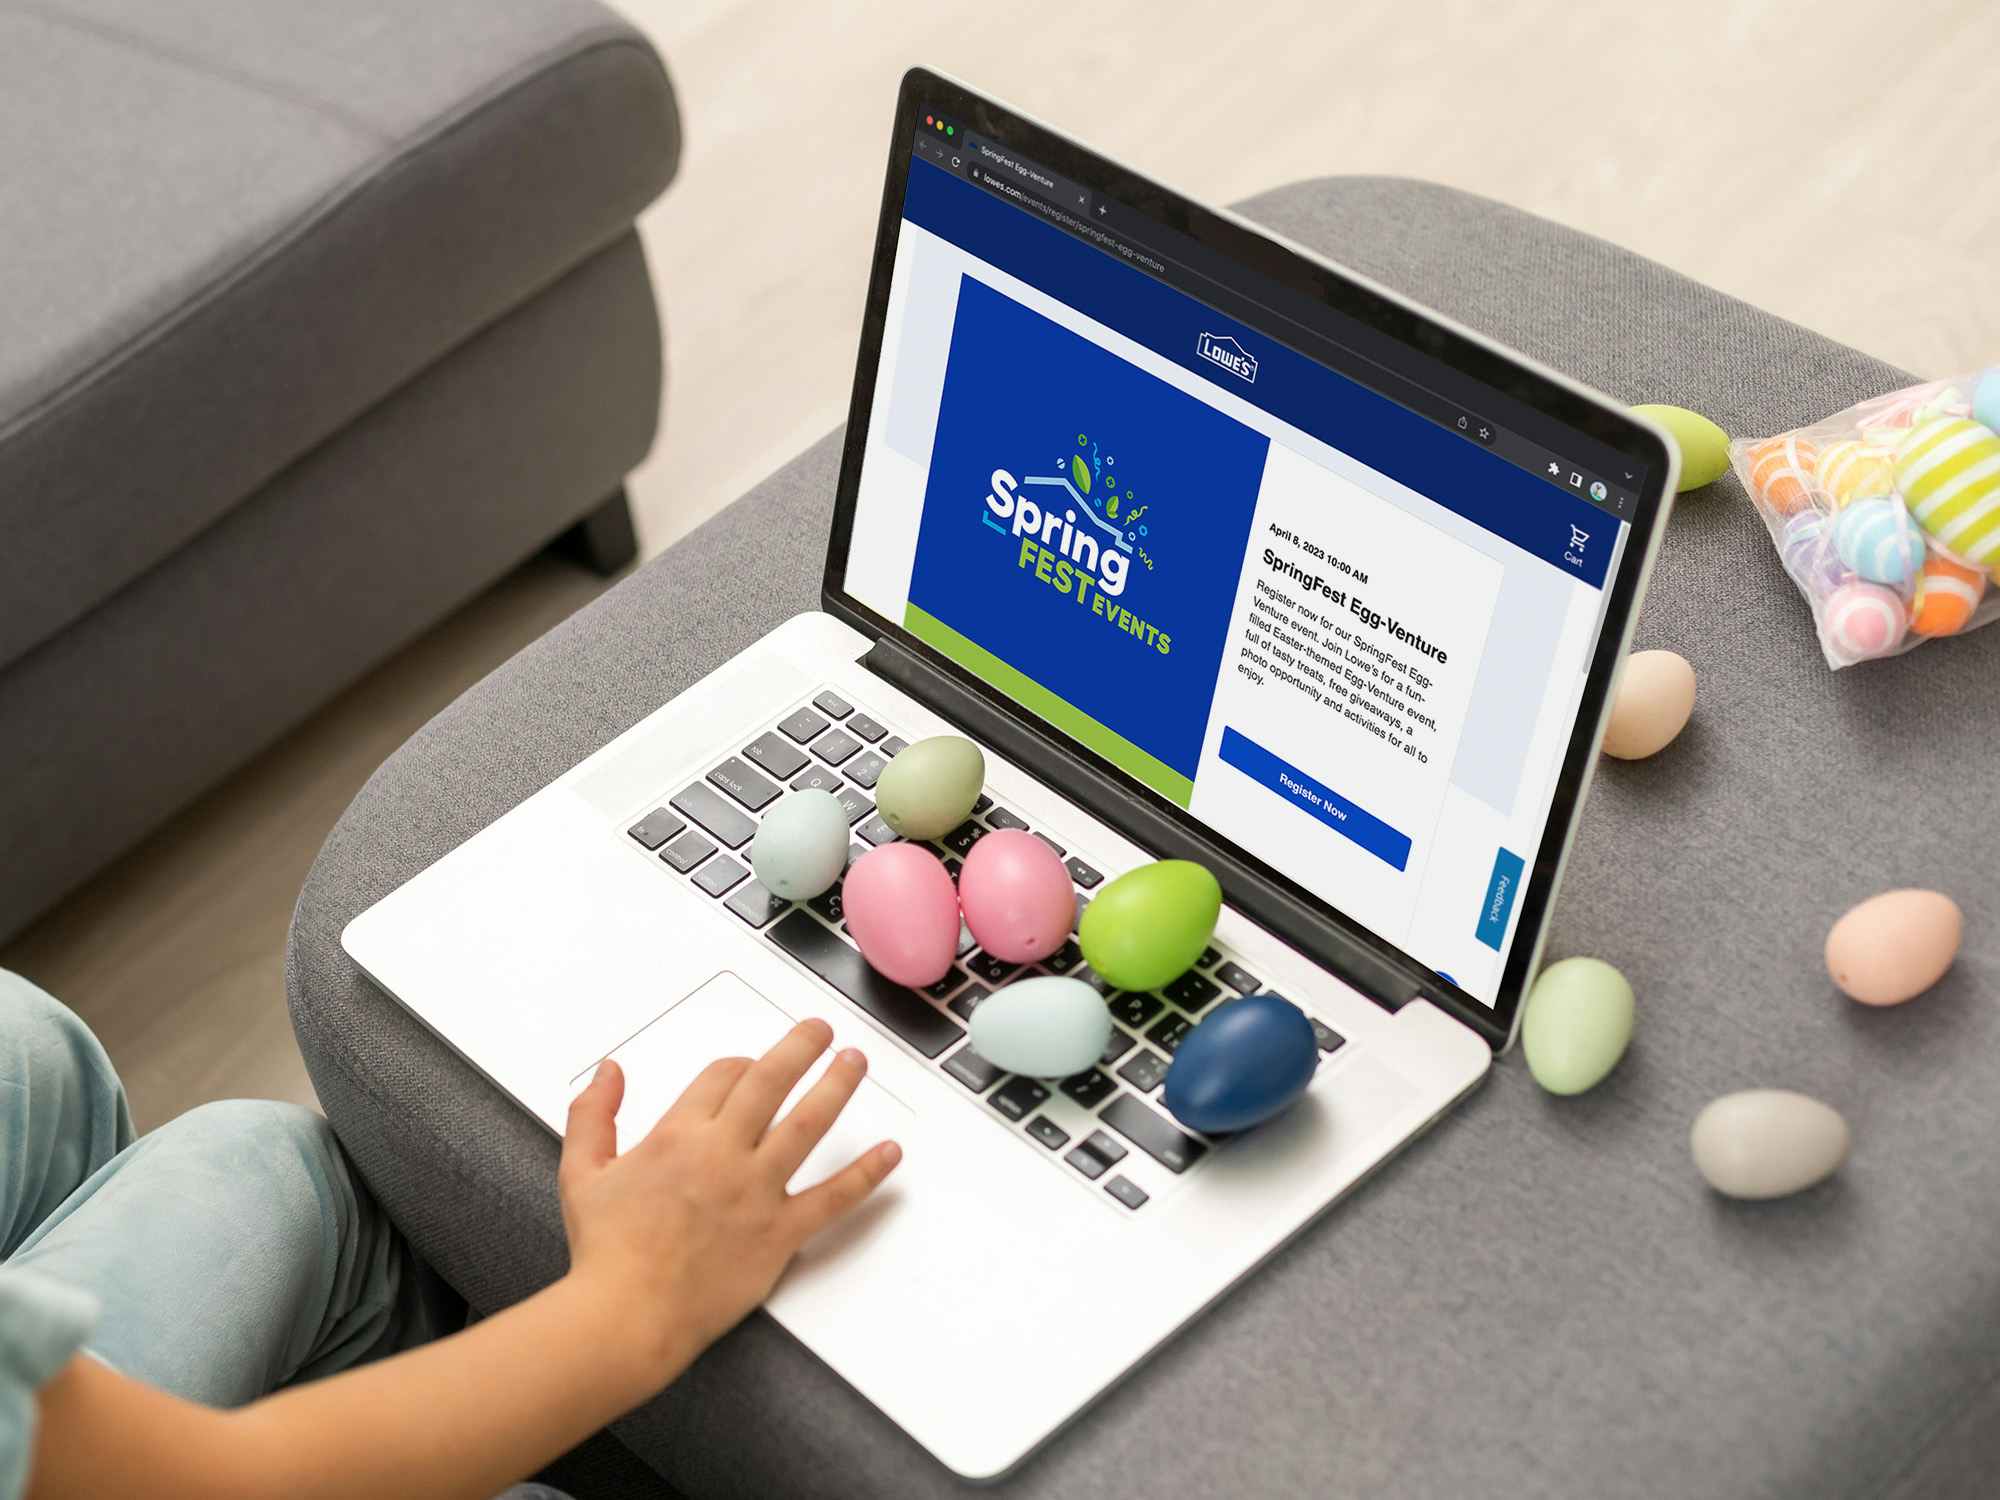 A laptop displaying the Lowe's SpringFest Egg-Venture event registration webpage with some colorful eggs on the keyboard and around the laptop